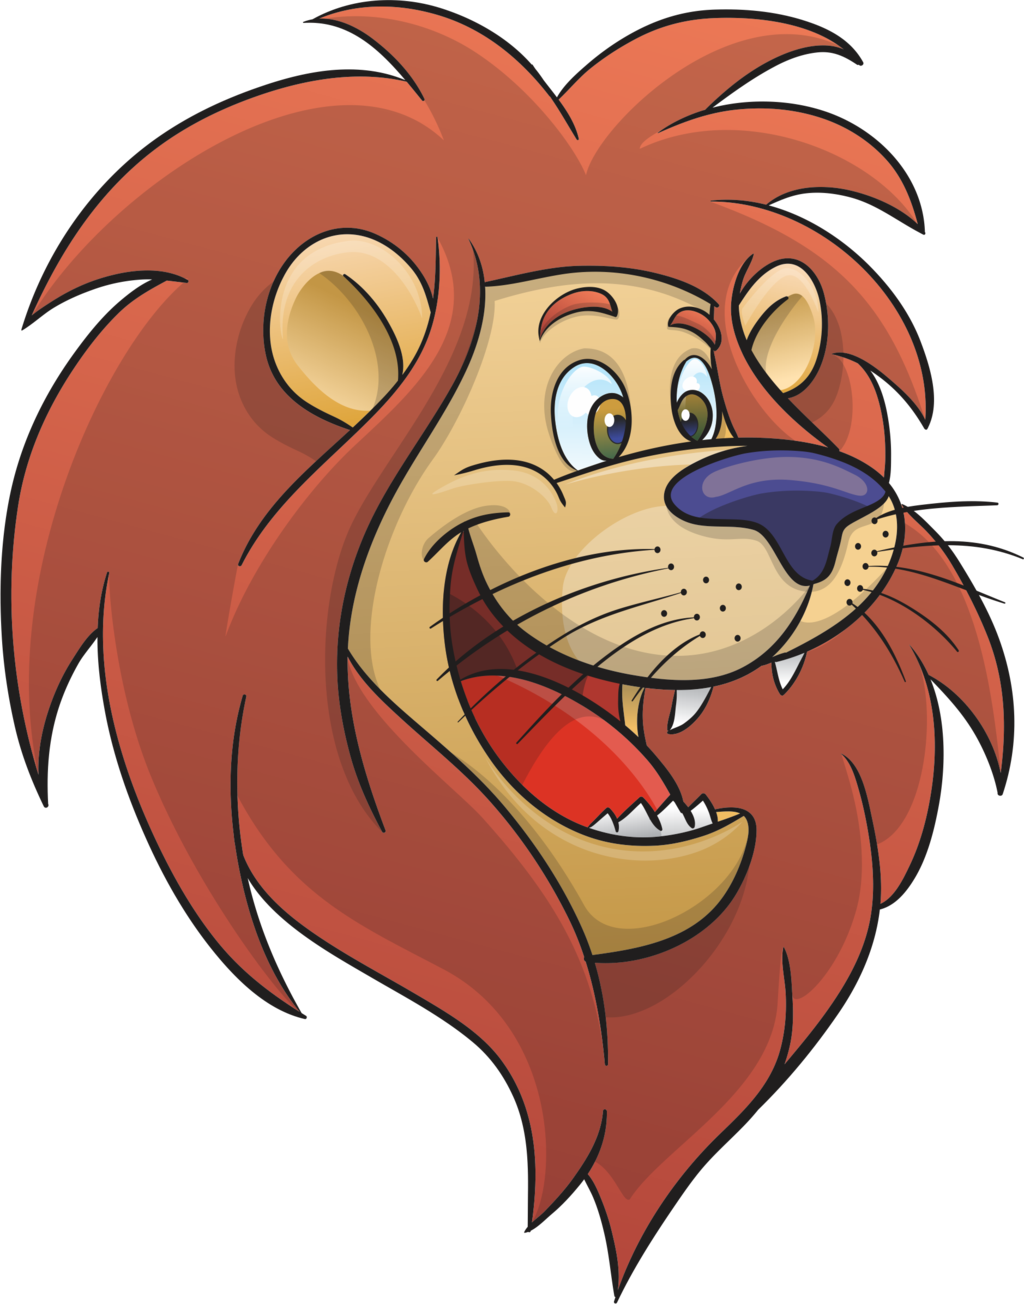 Lion Cartoon Pictures Color : Lion Cartoon Draw Cartoons Drawing ...